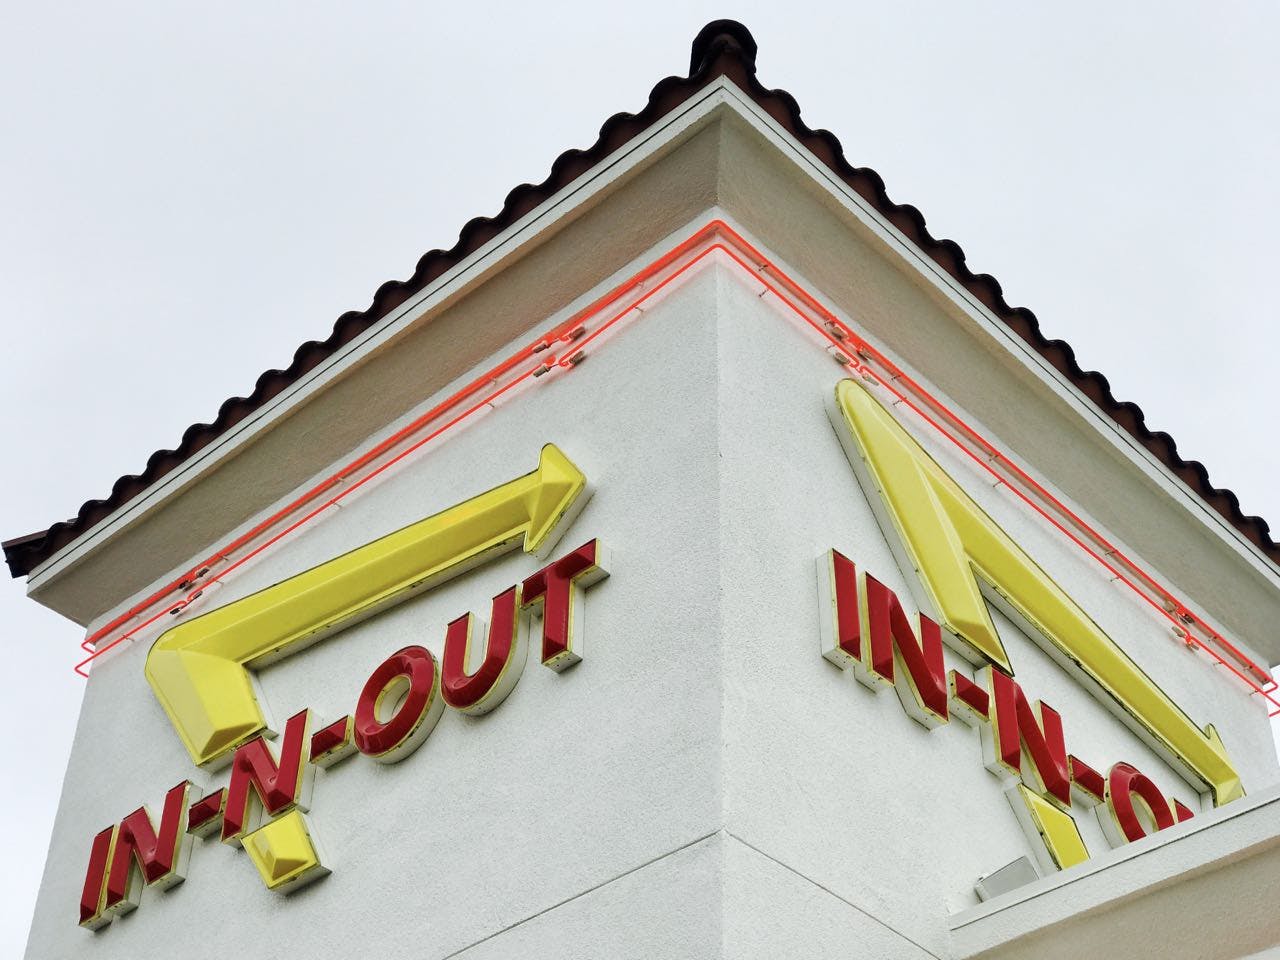 A photo In-N-Out burger